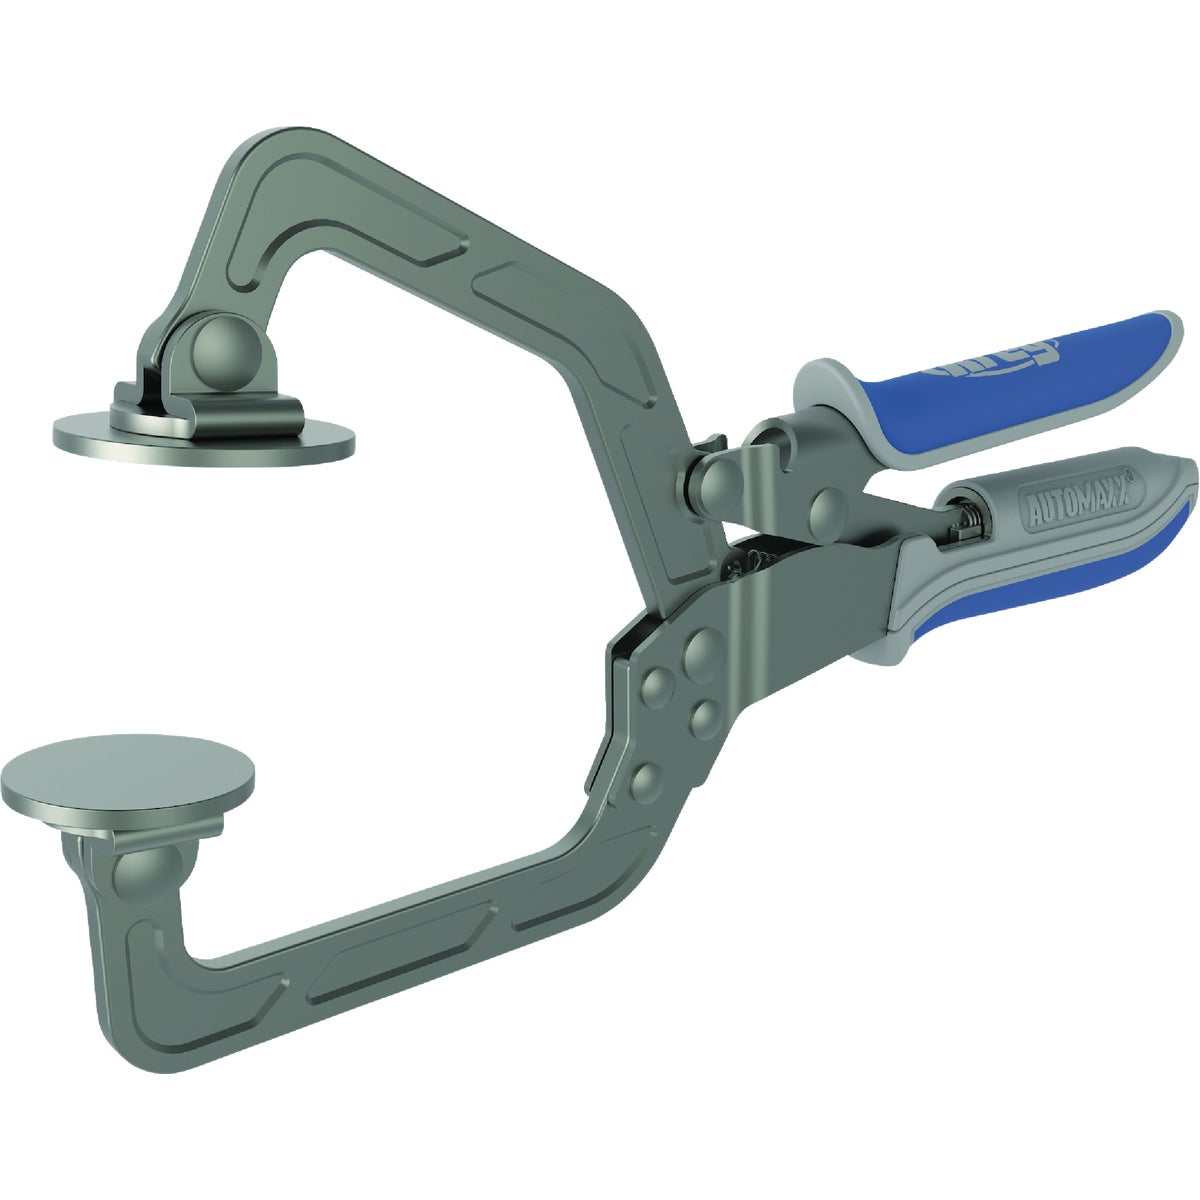 Item 302411, Wood Project Clamps are perfect for Kreg Joinery, project assembly, general